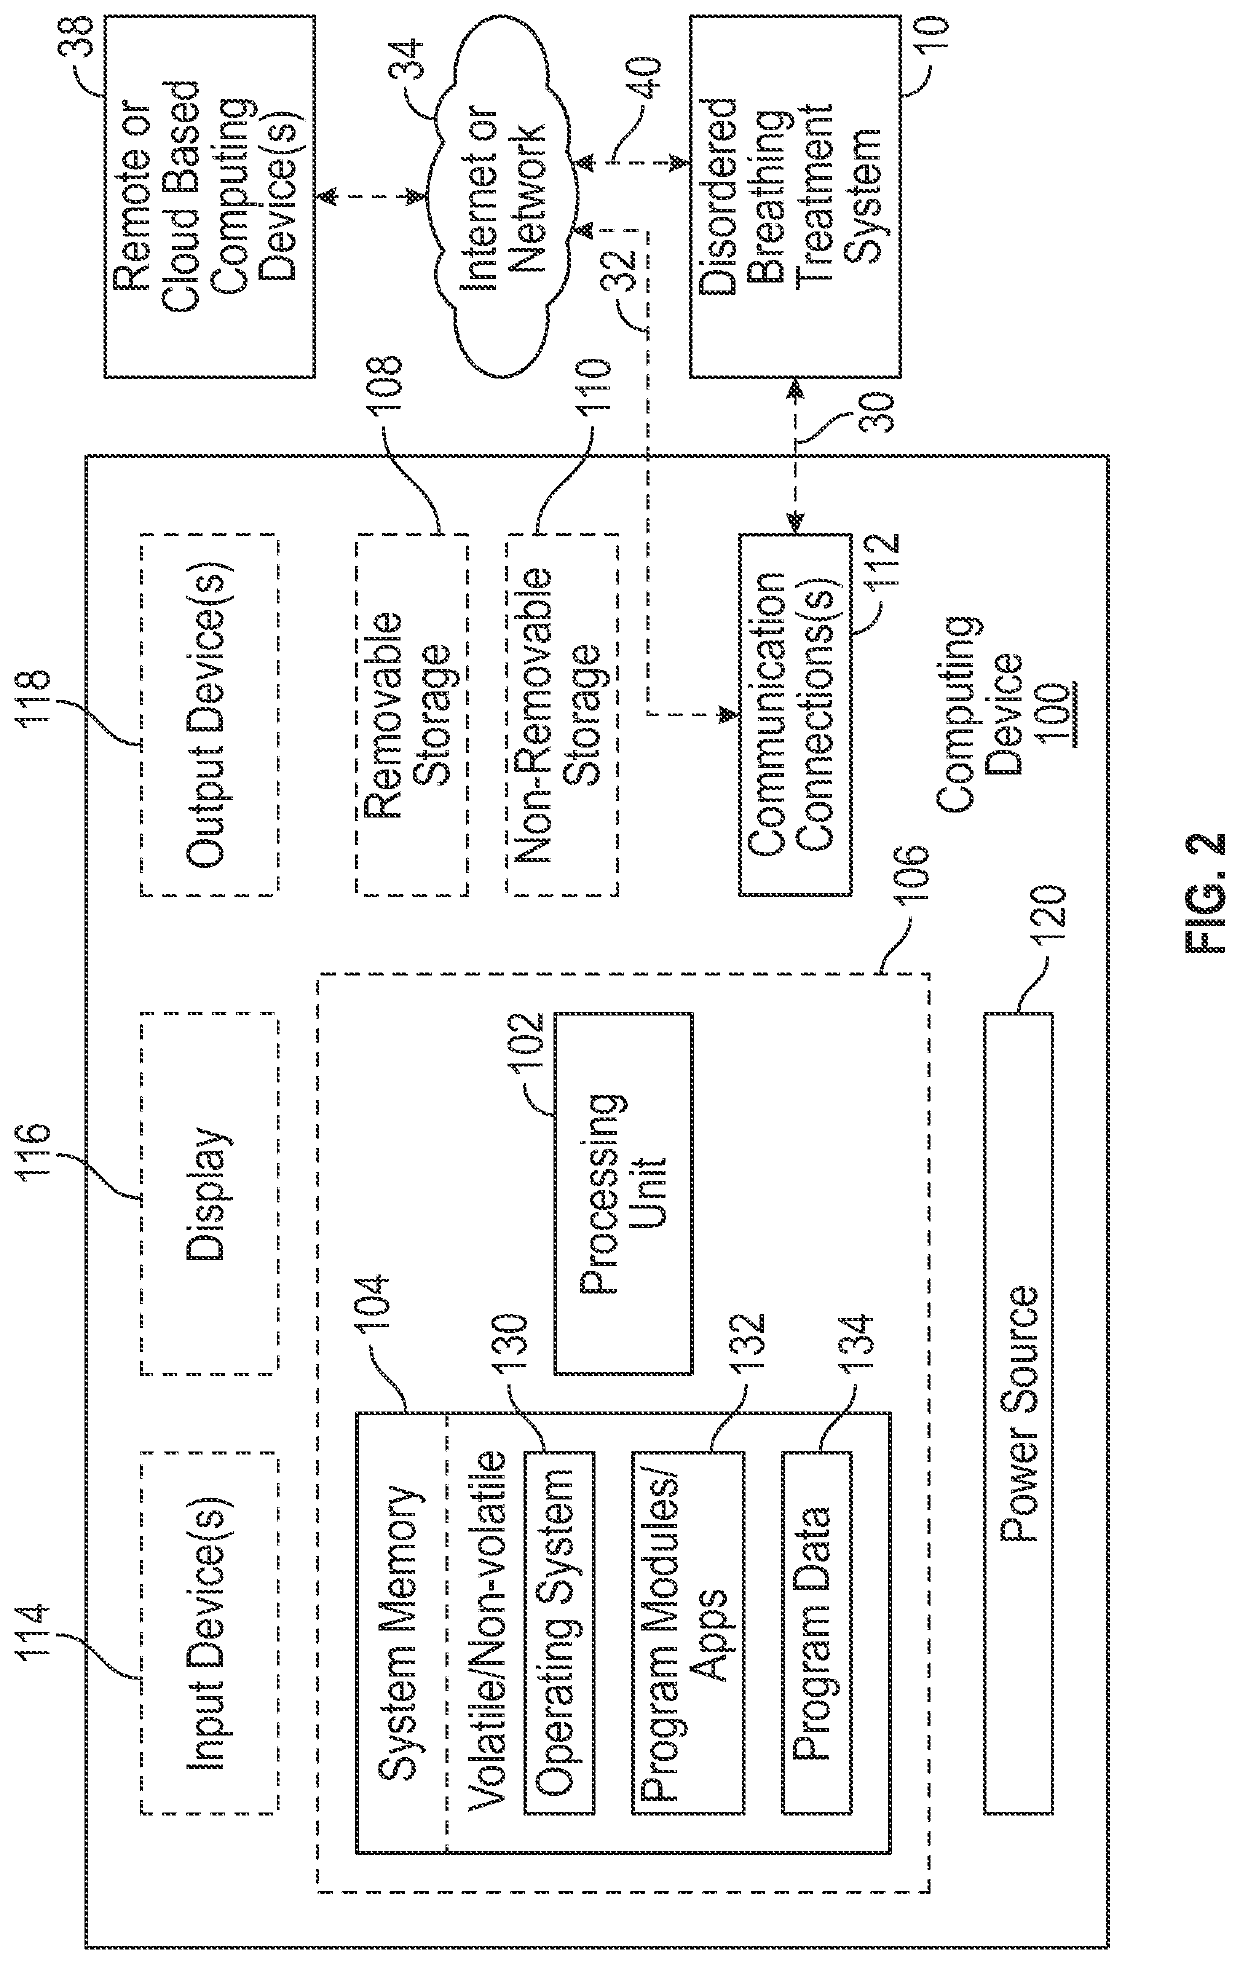 Monitoring system and user interface for monitoring implantable disordered breathing treatment systems